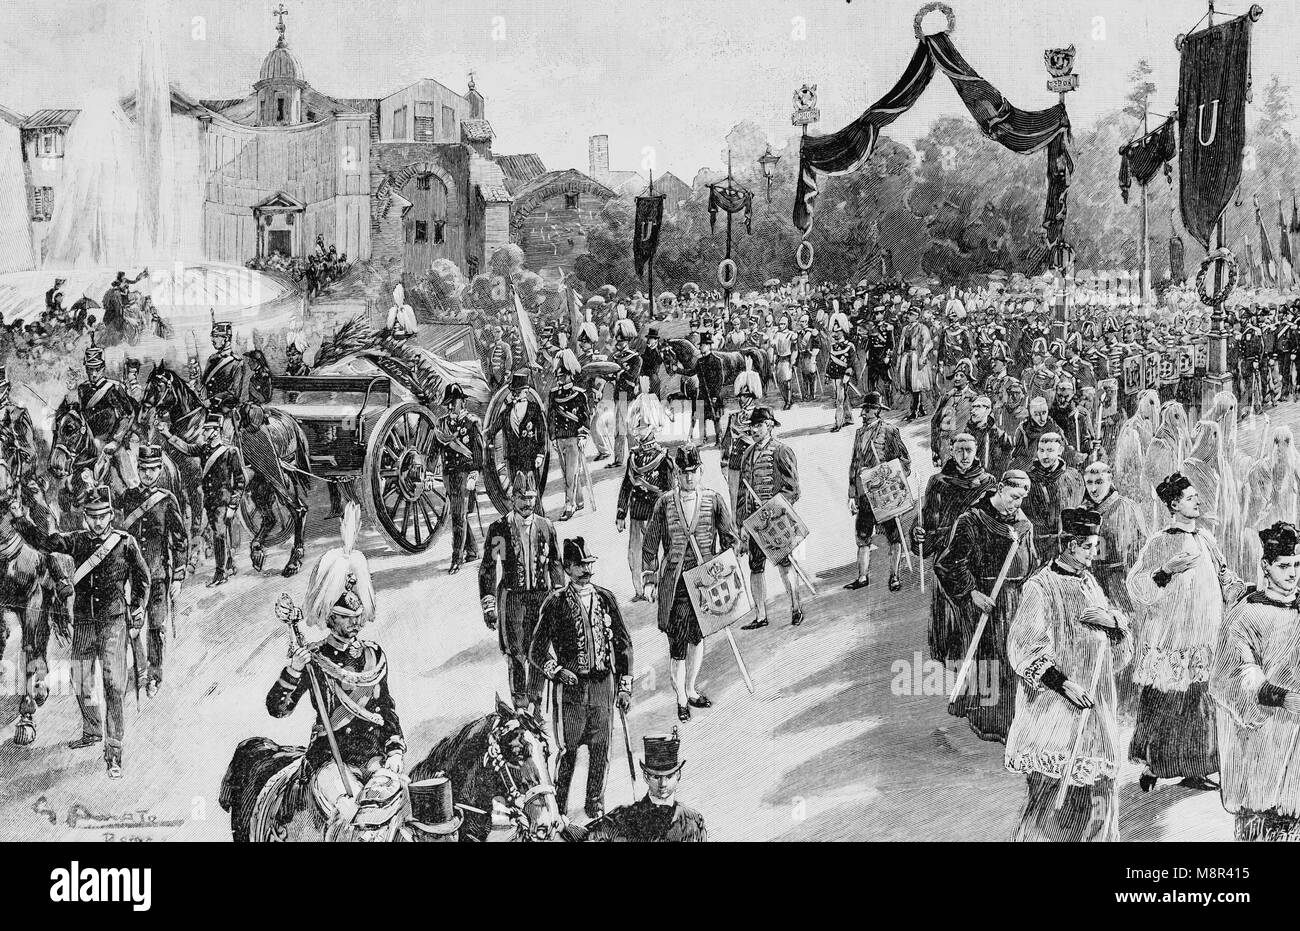 Funeral of King Humberto I, Roma, Picture from the French weekly newspaper l'Illustration, 11th August 1900 Stock Photo